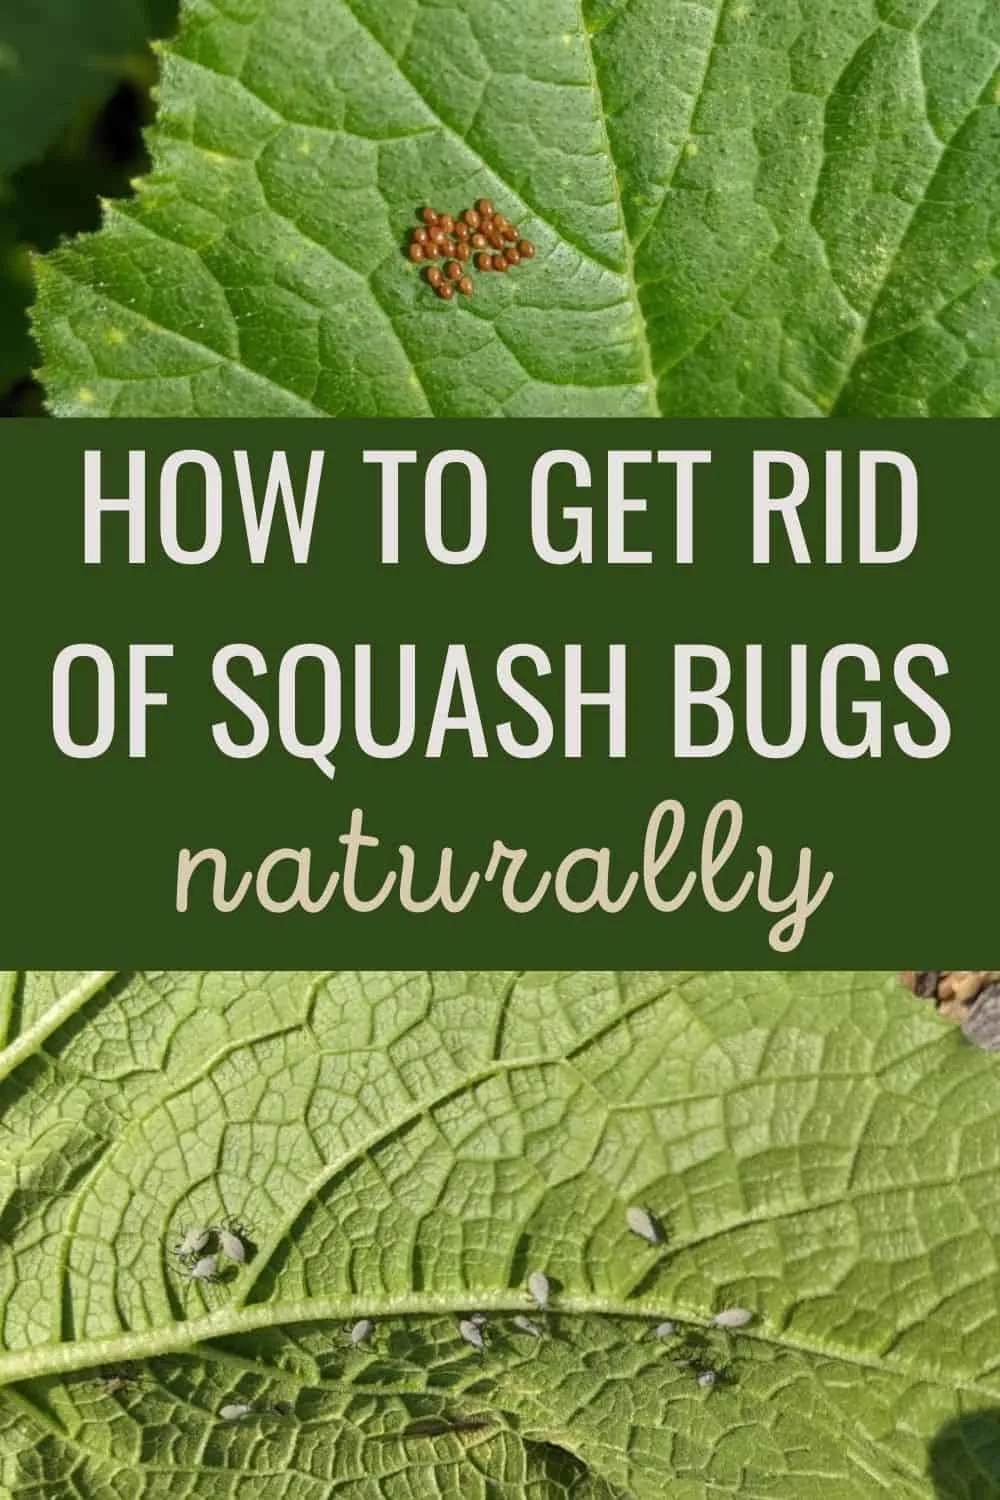 How to get rid of squash bugs naturally